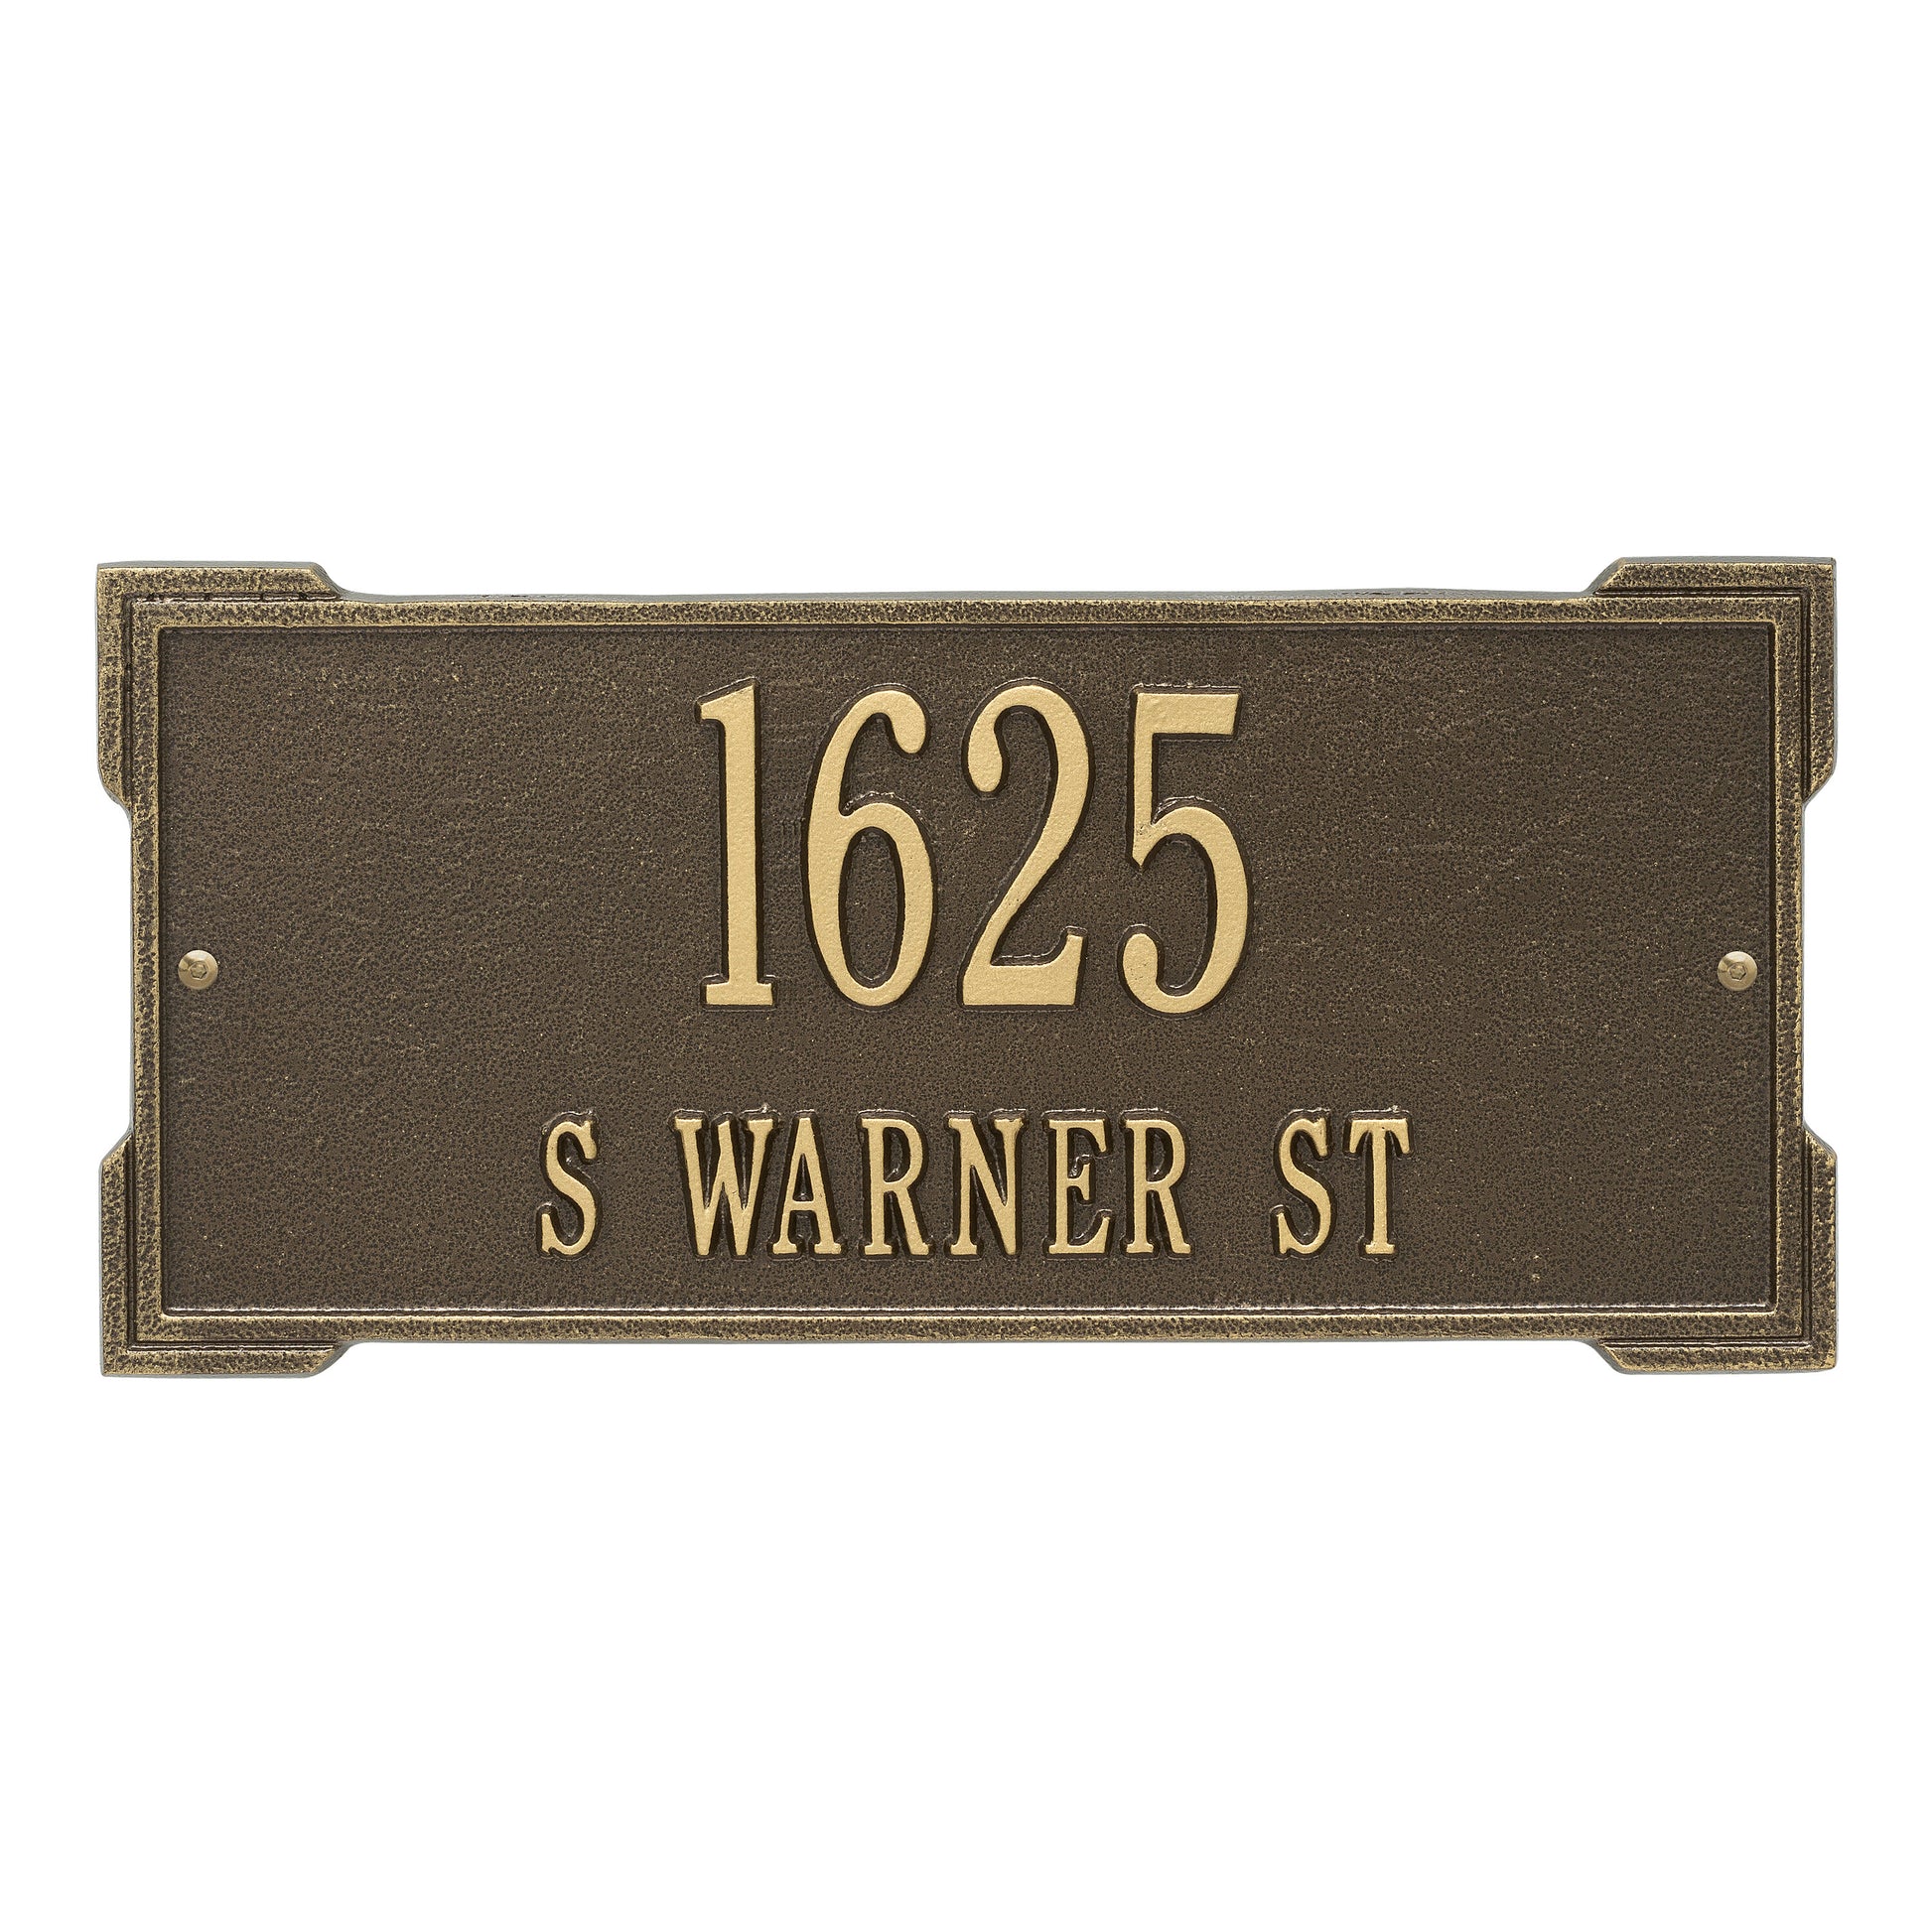 Whitehall Products Personalized Roanoke Standard Wall Plaque Two Line Antique Copper